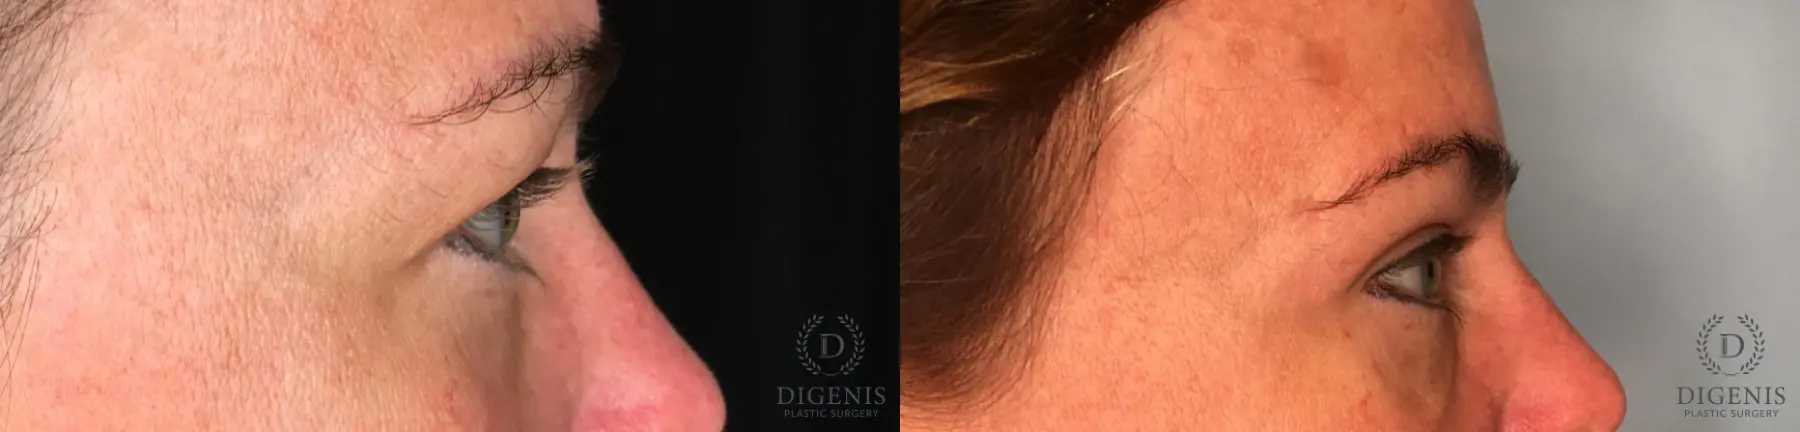 Blepharoplasty: Patient 9 - Before and After 3